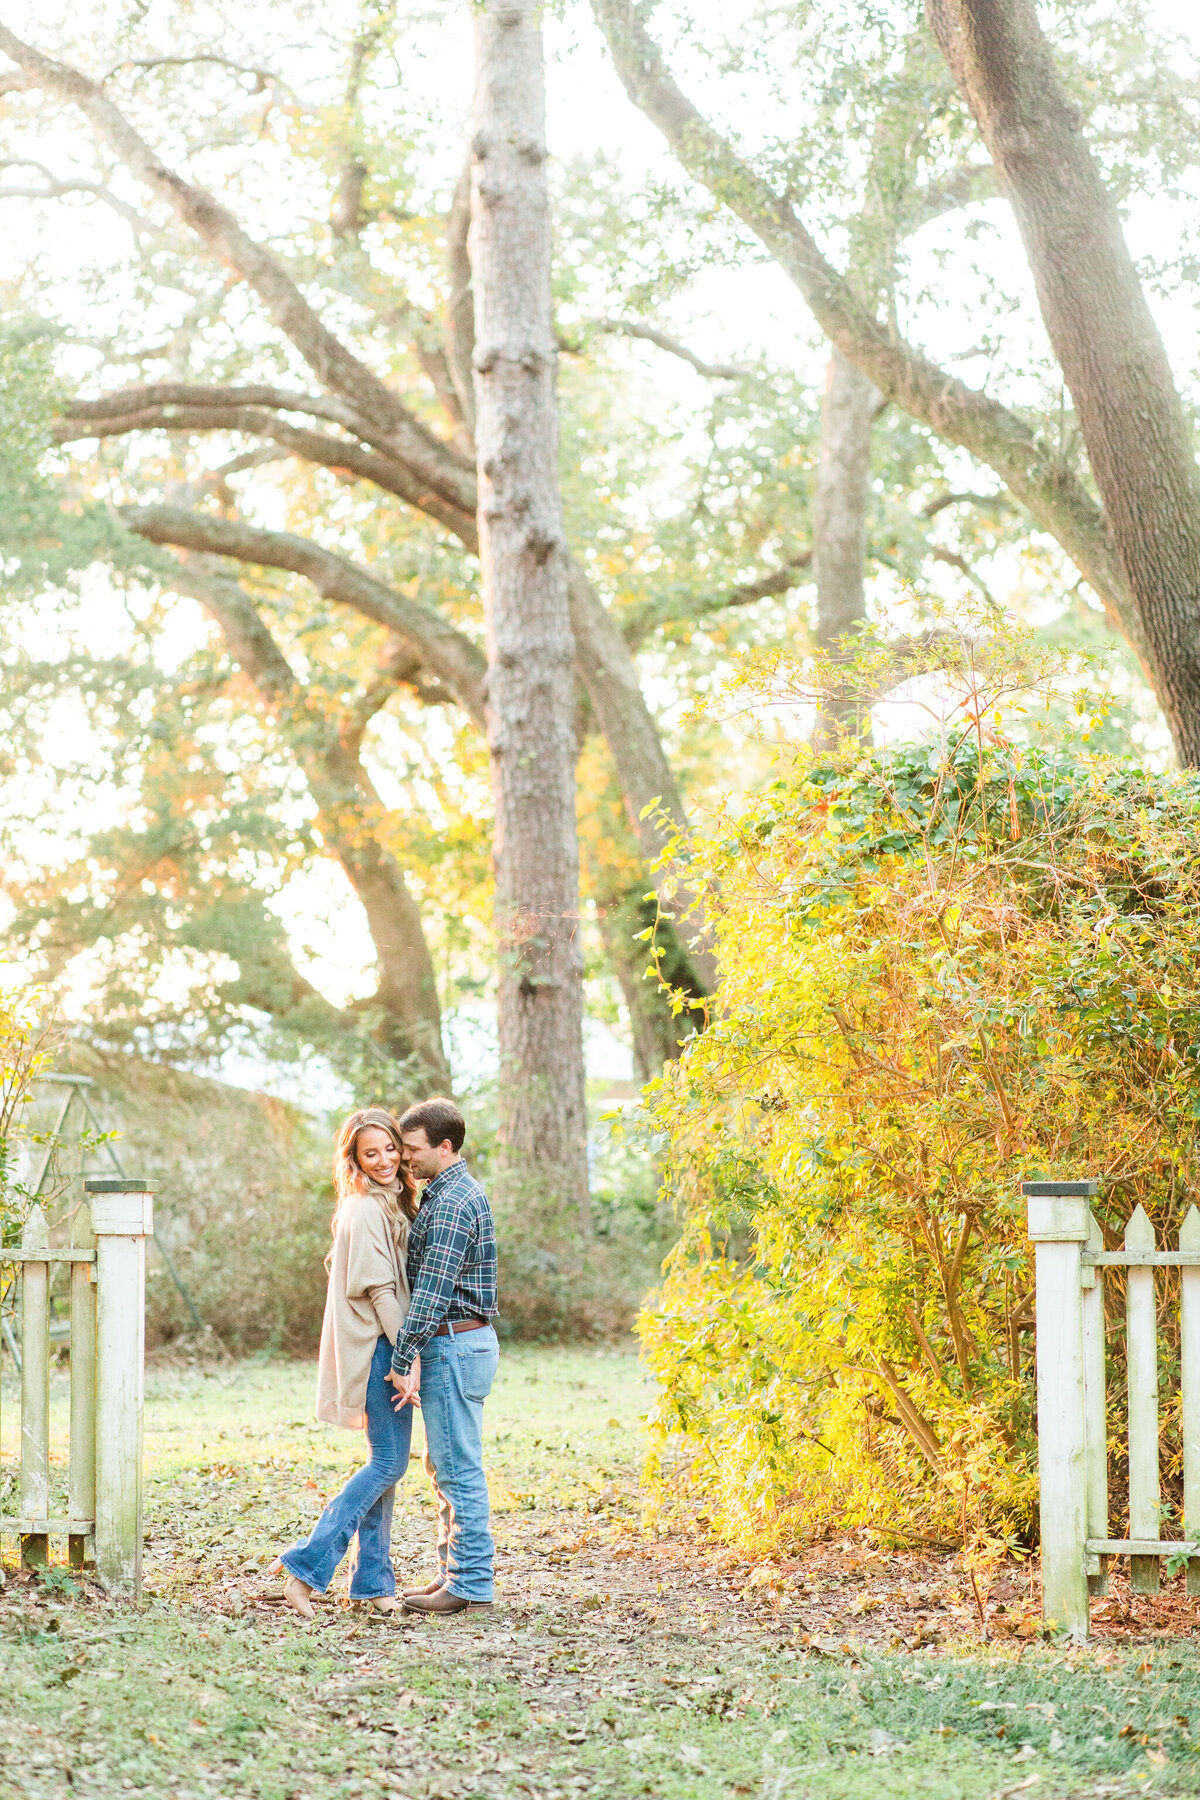 Renee Lorio Photography South Louisiana Wedding Engagement Light Airy Portrait Photographer Photos Southern Clean Colorful30